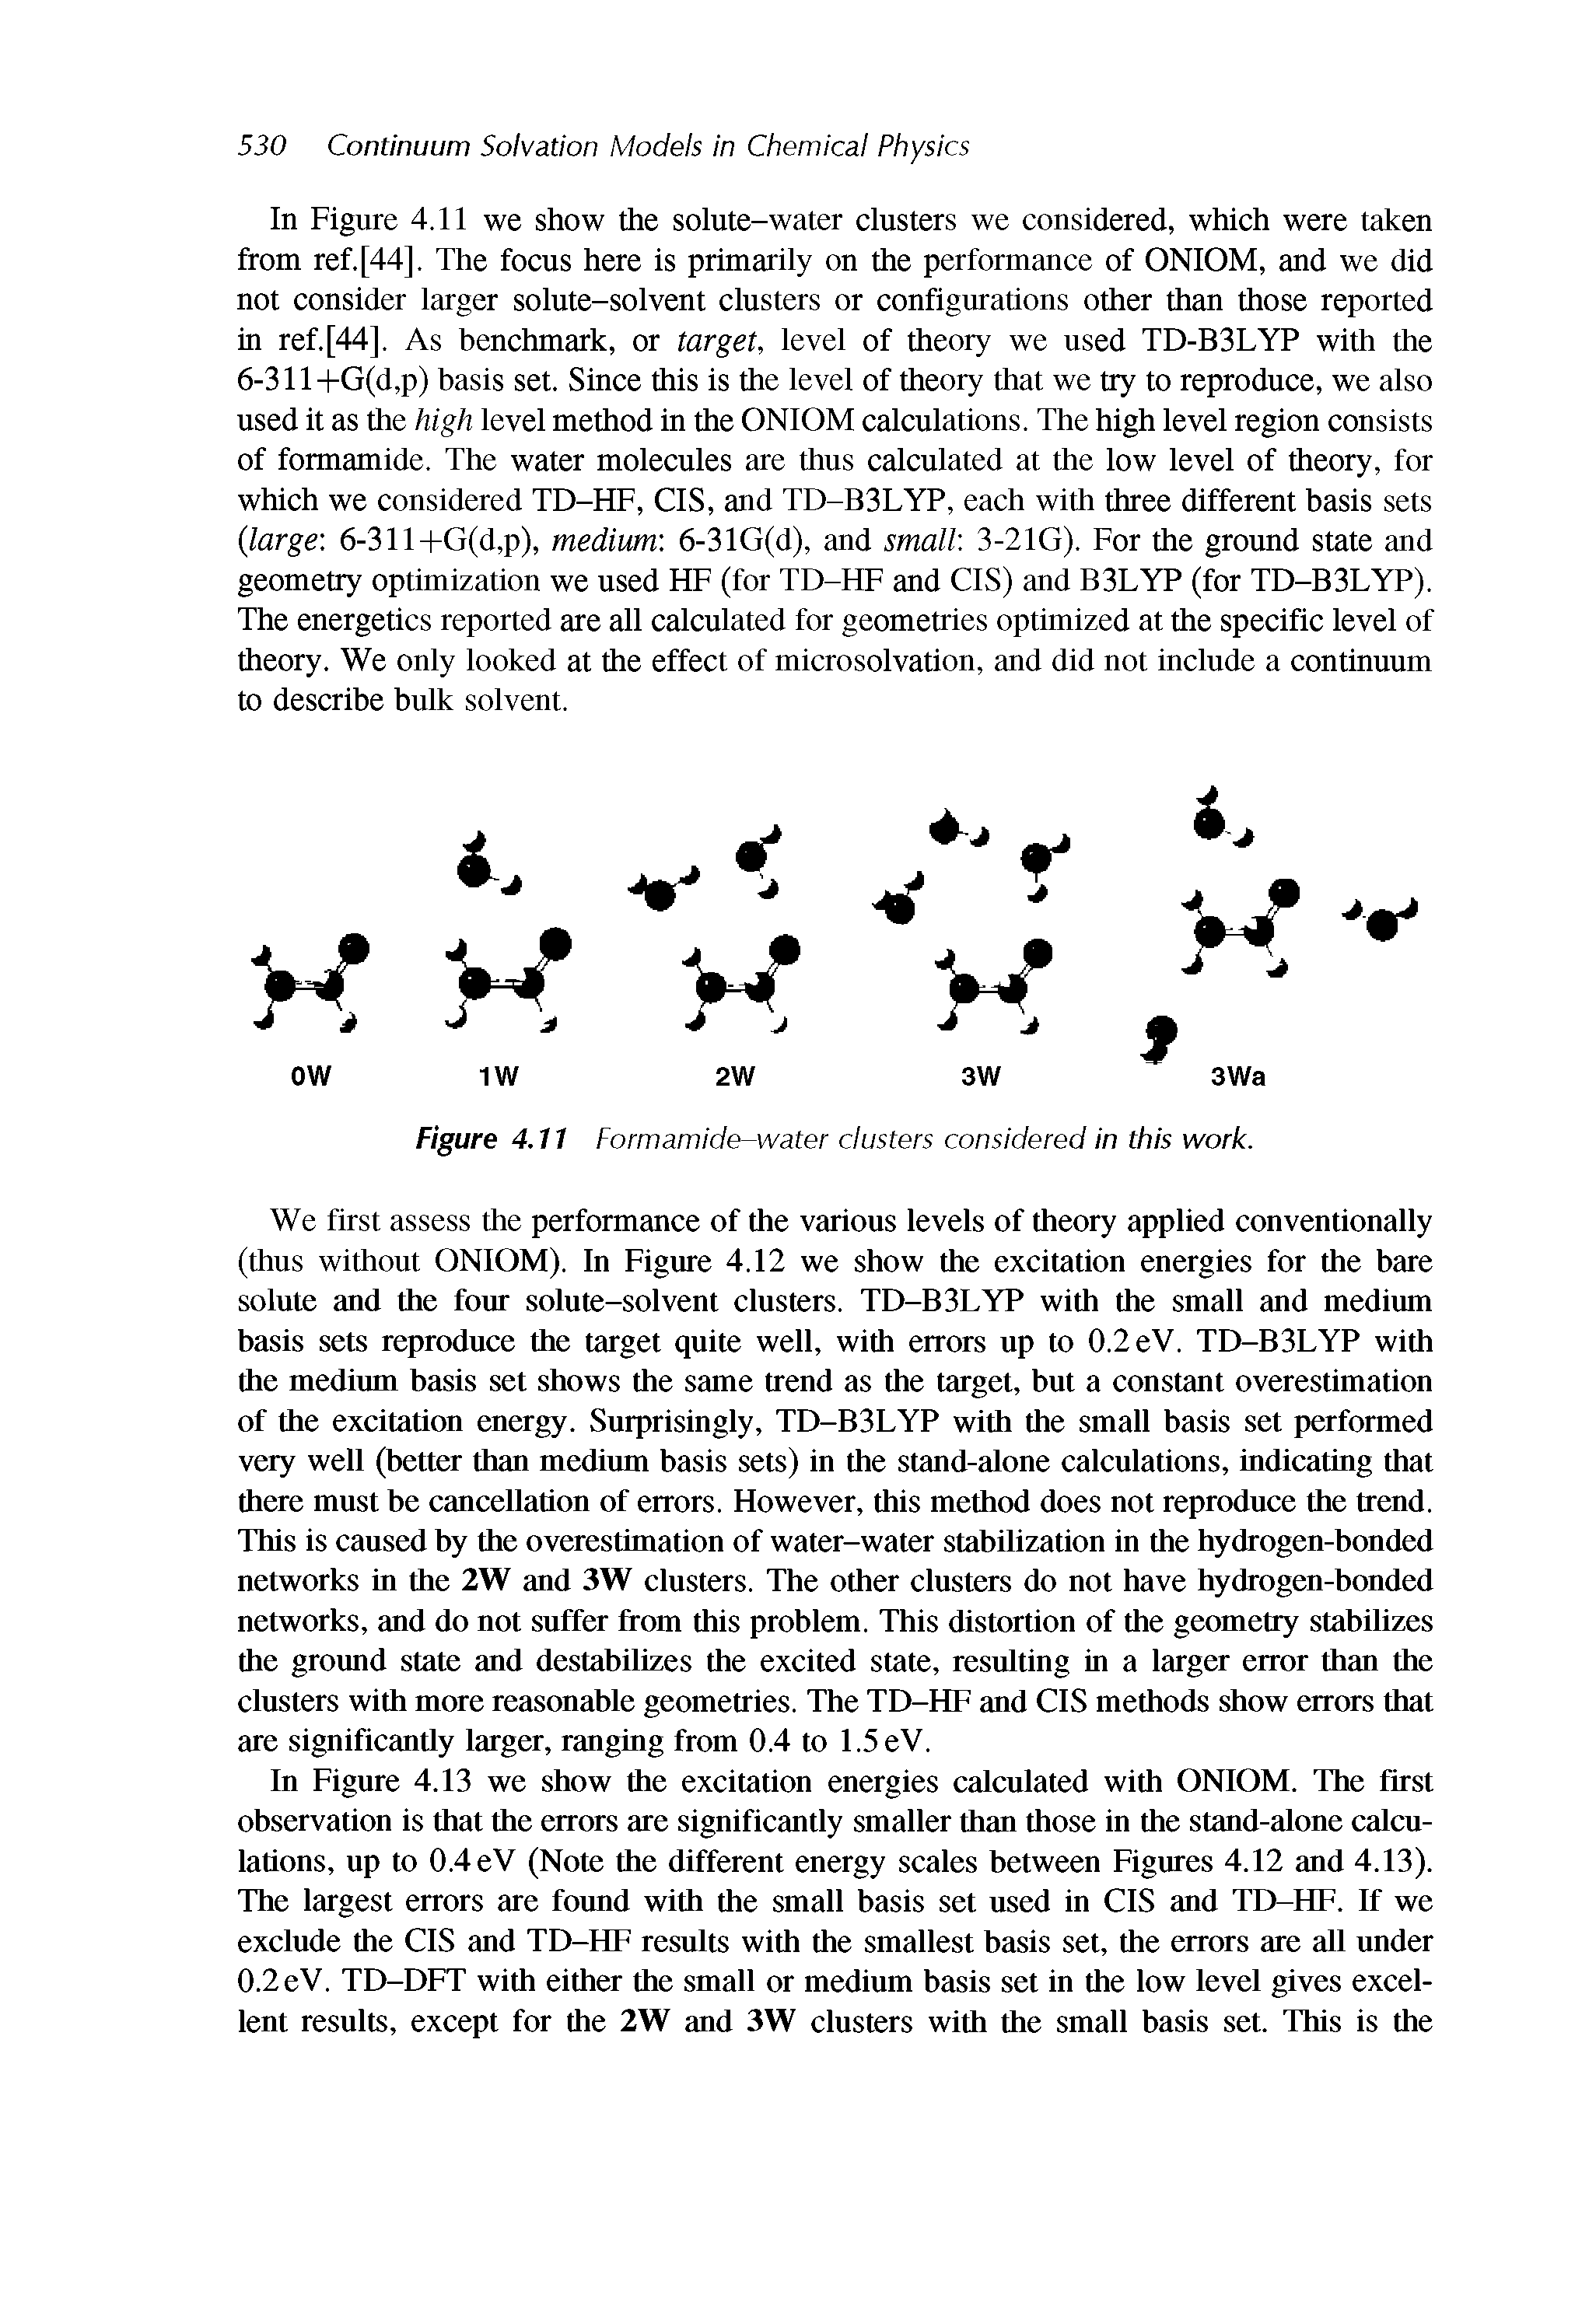 Figure 4.11 Formamide-water clusters considered in this work.